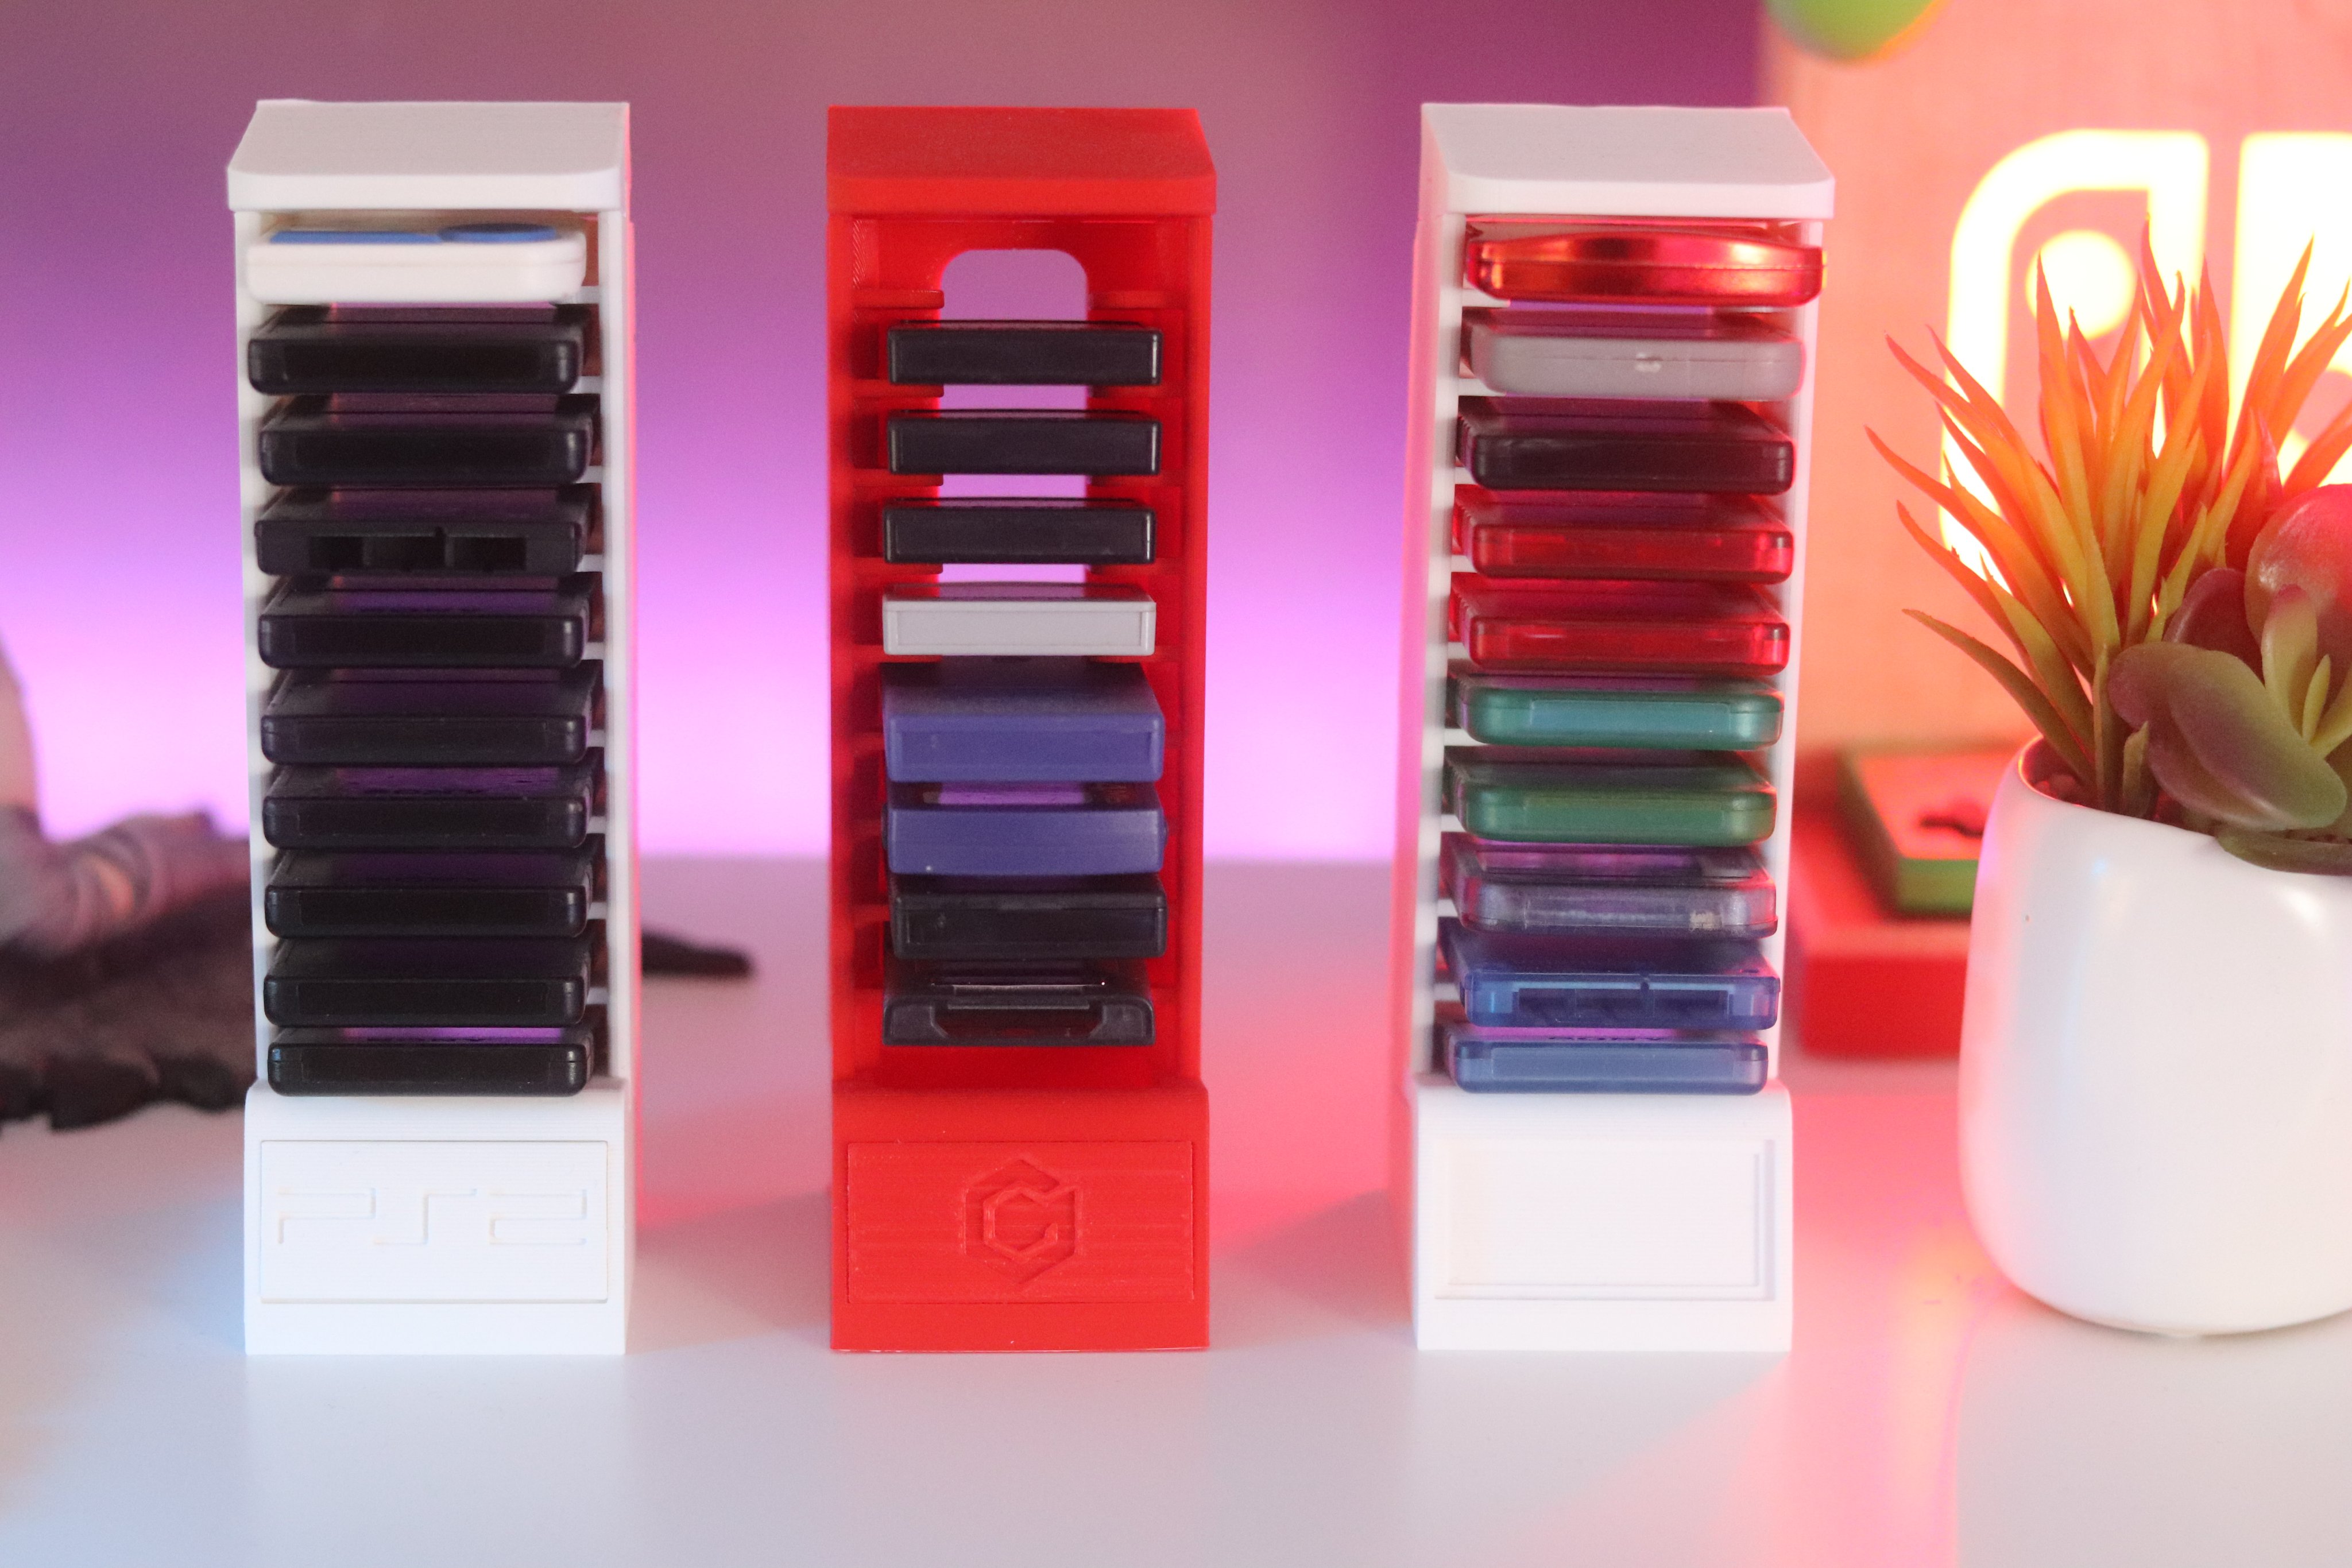 Memory Card Tower/Holder (PS1/PS2/GameCube)